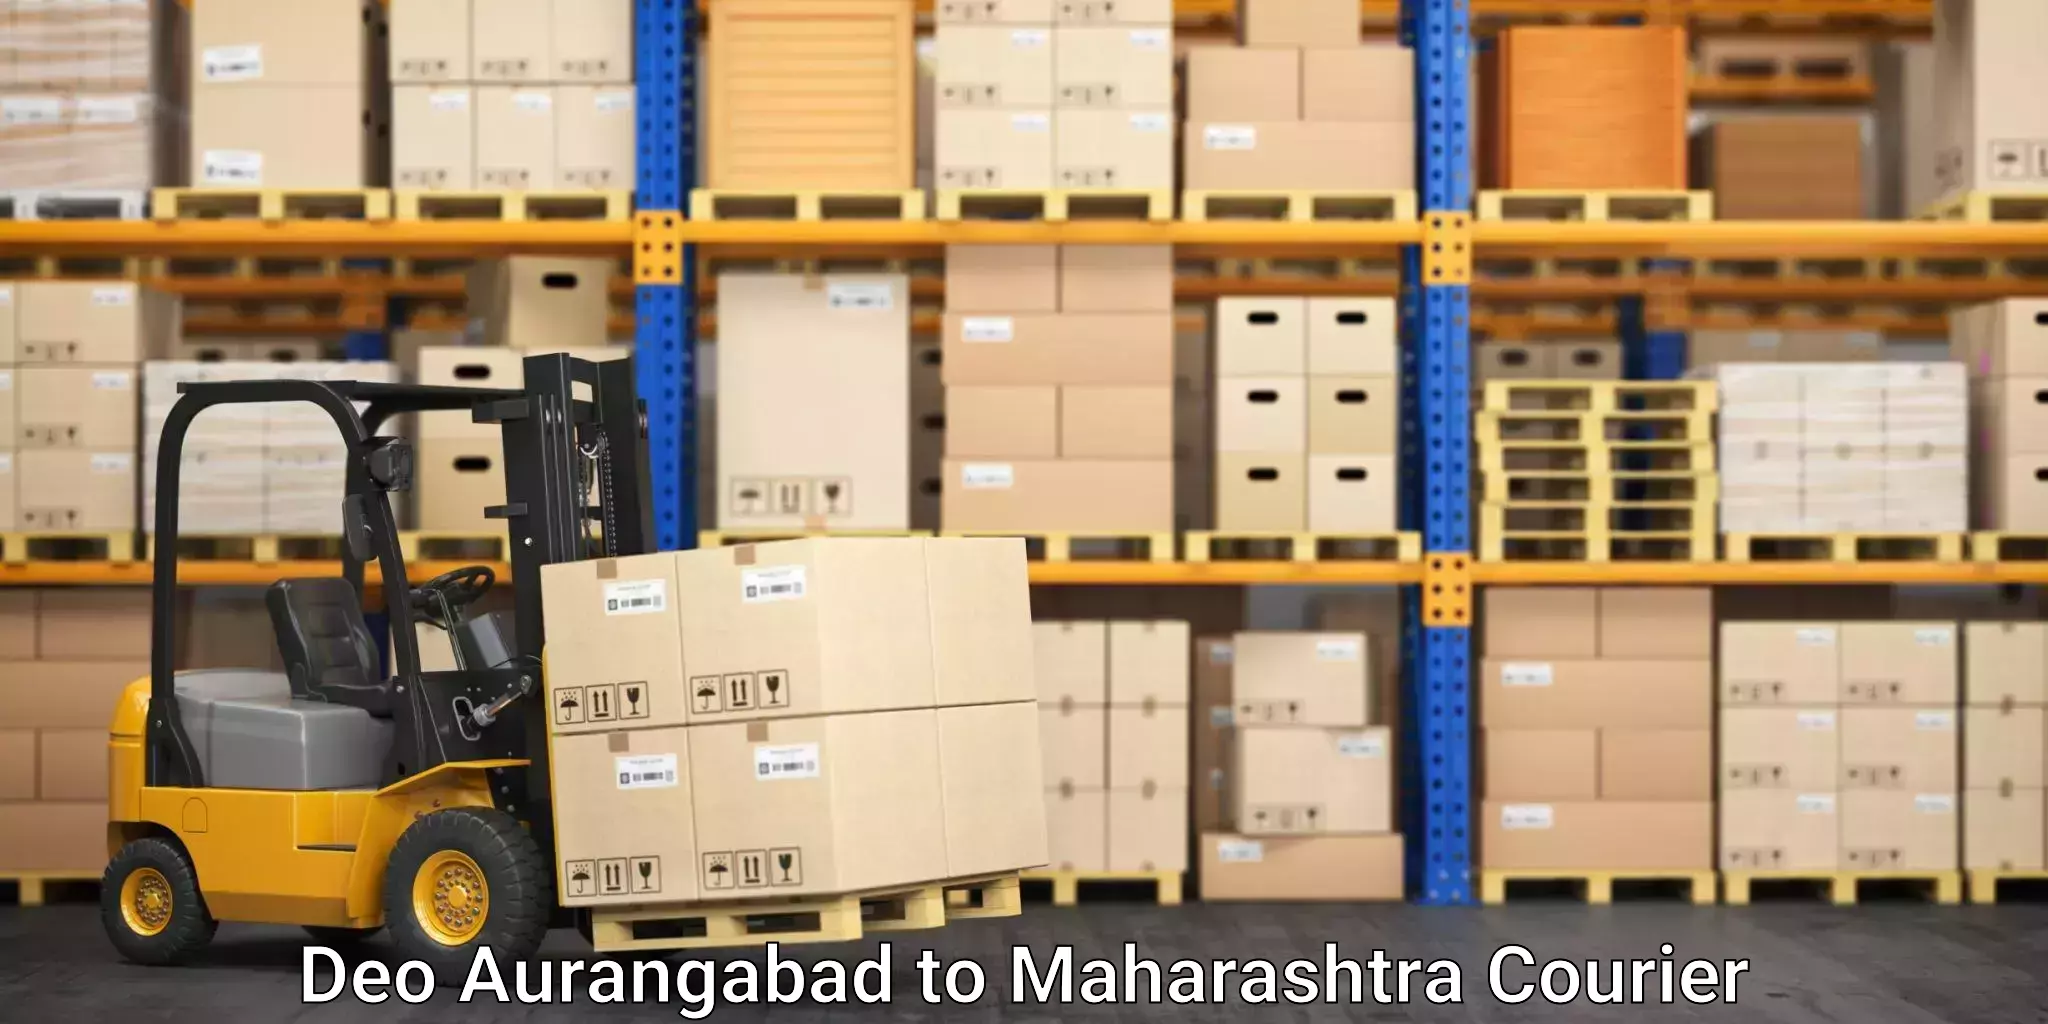 Furniture moving specialists Deo Aurangabad to Sinnar